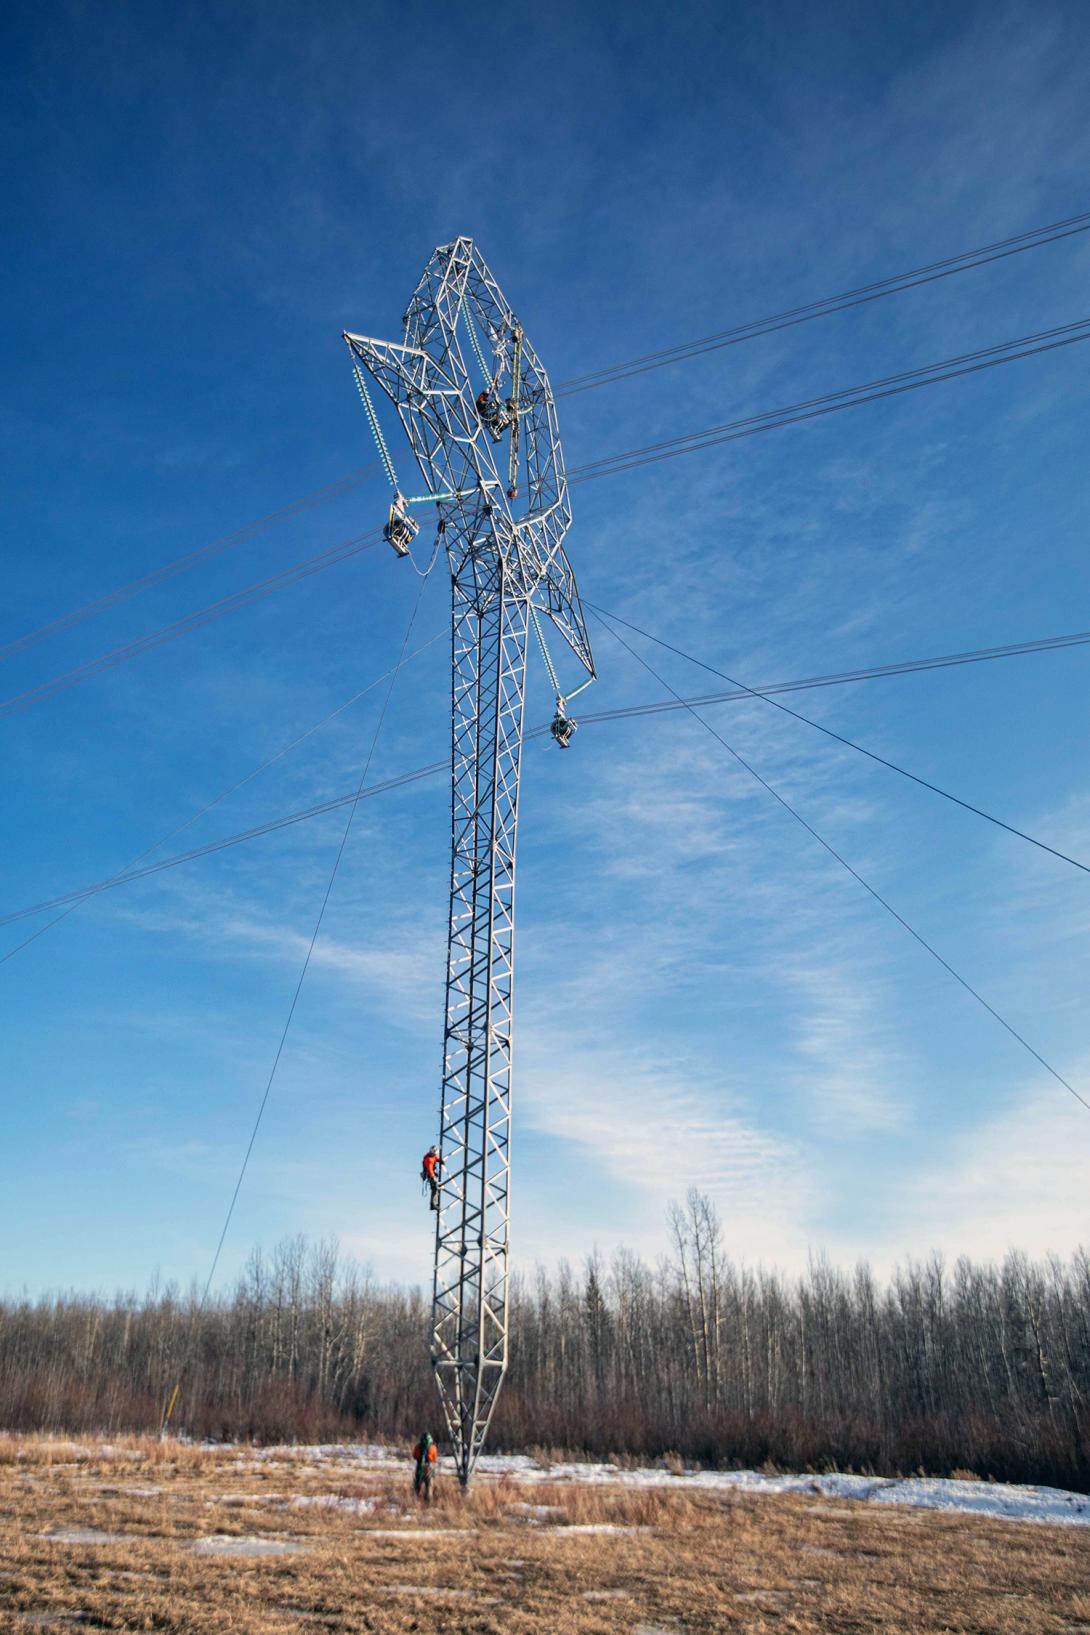 Workers climbing a guyed tower to attach the conductors. | February 2022